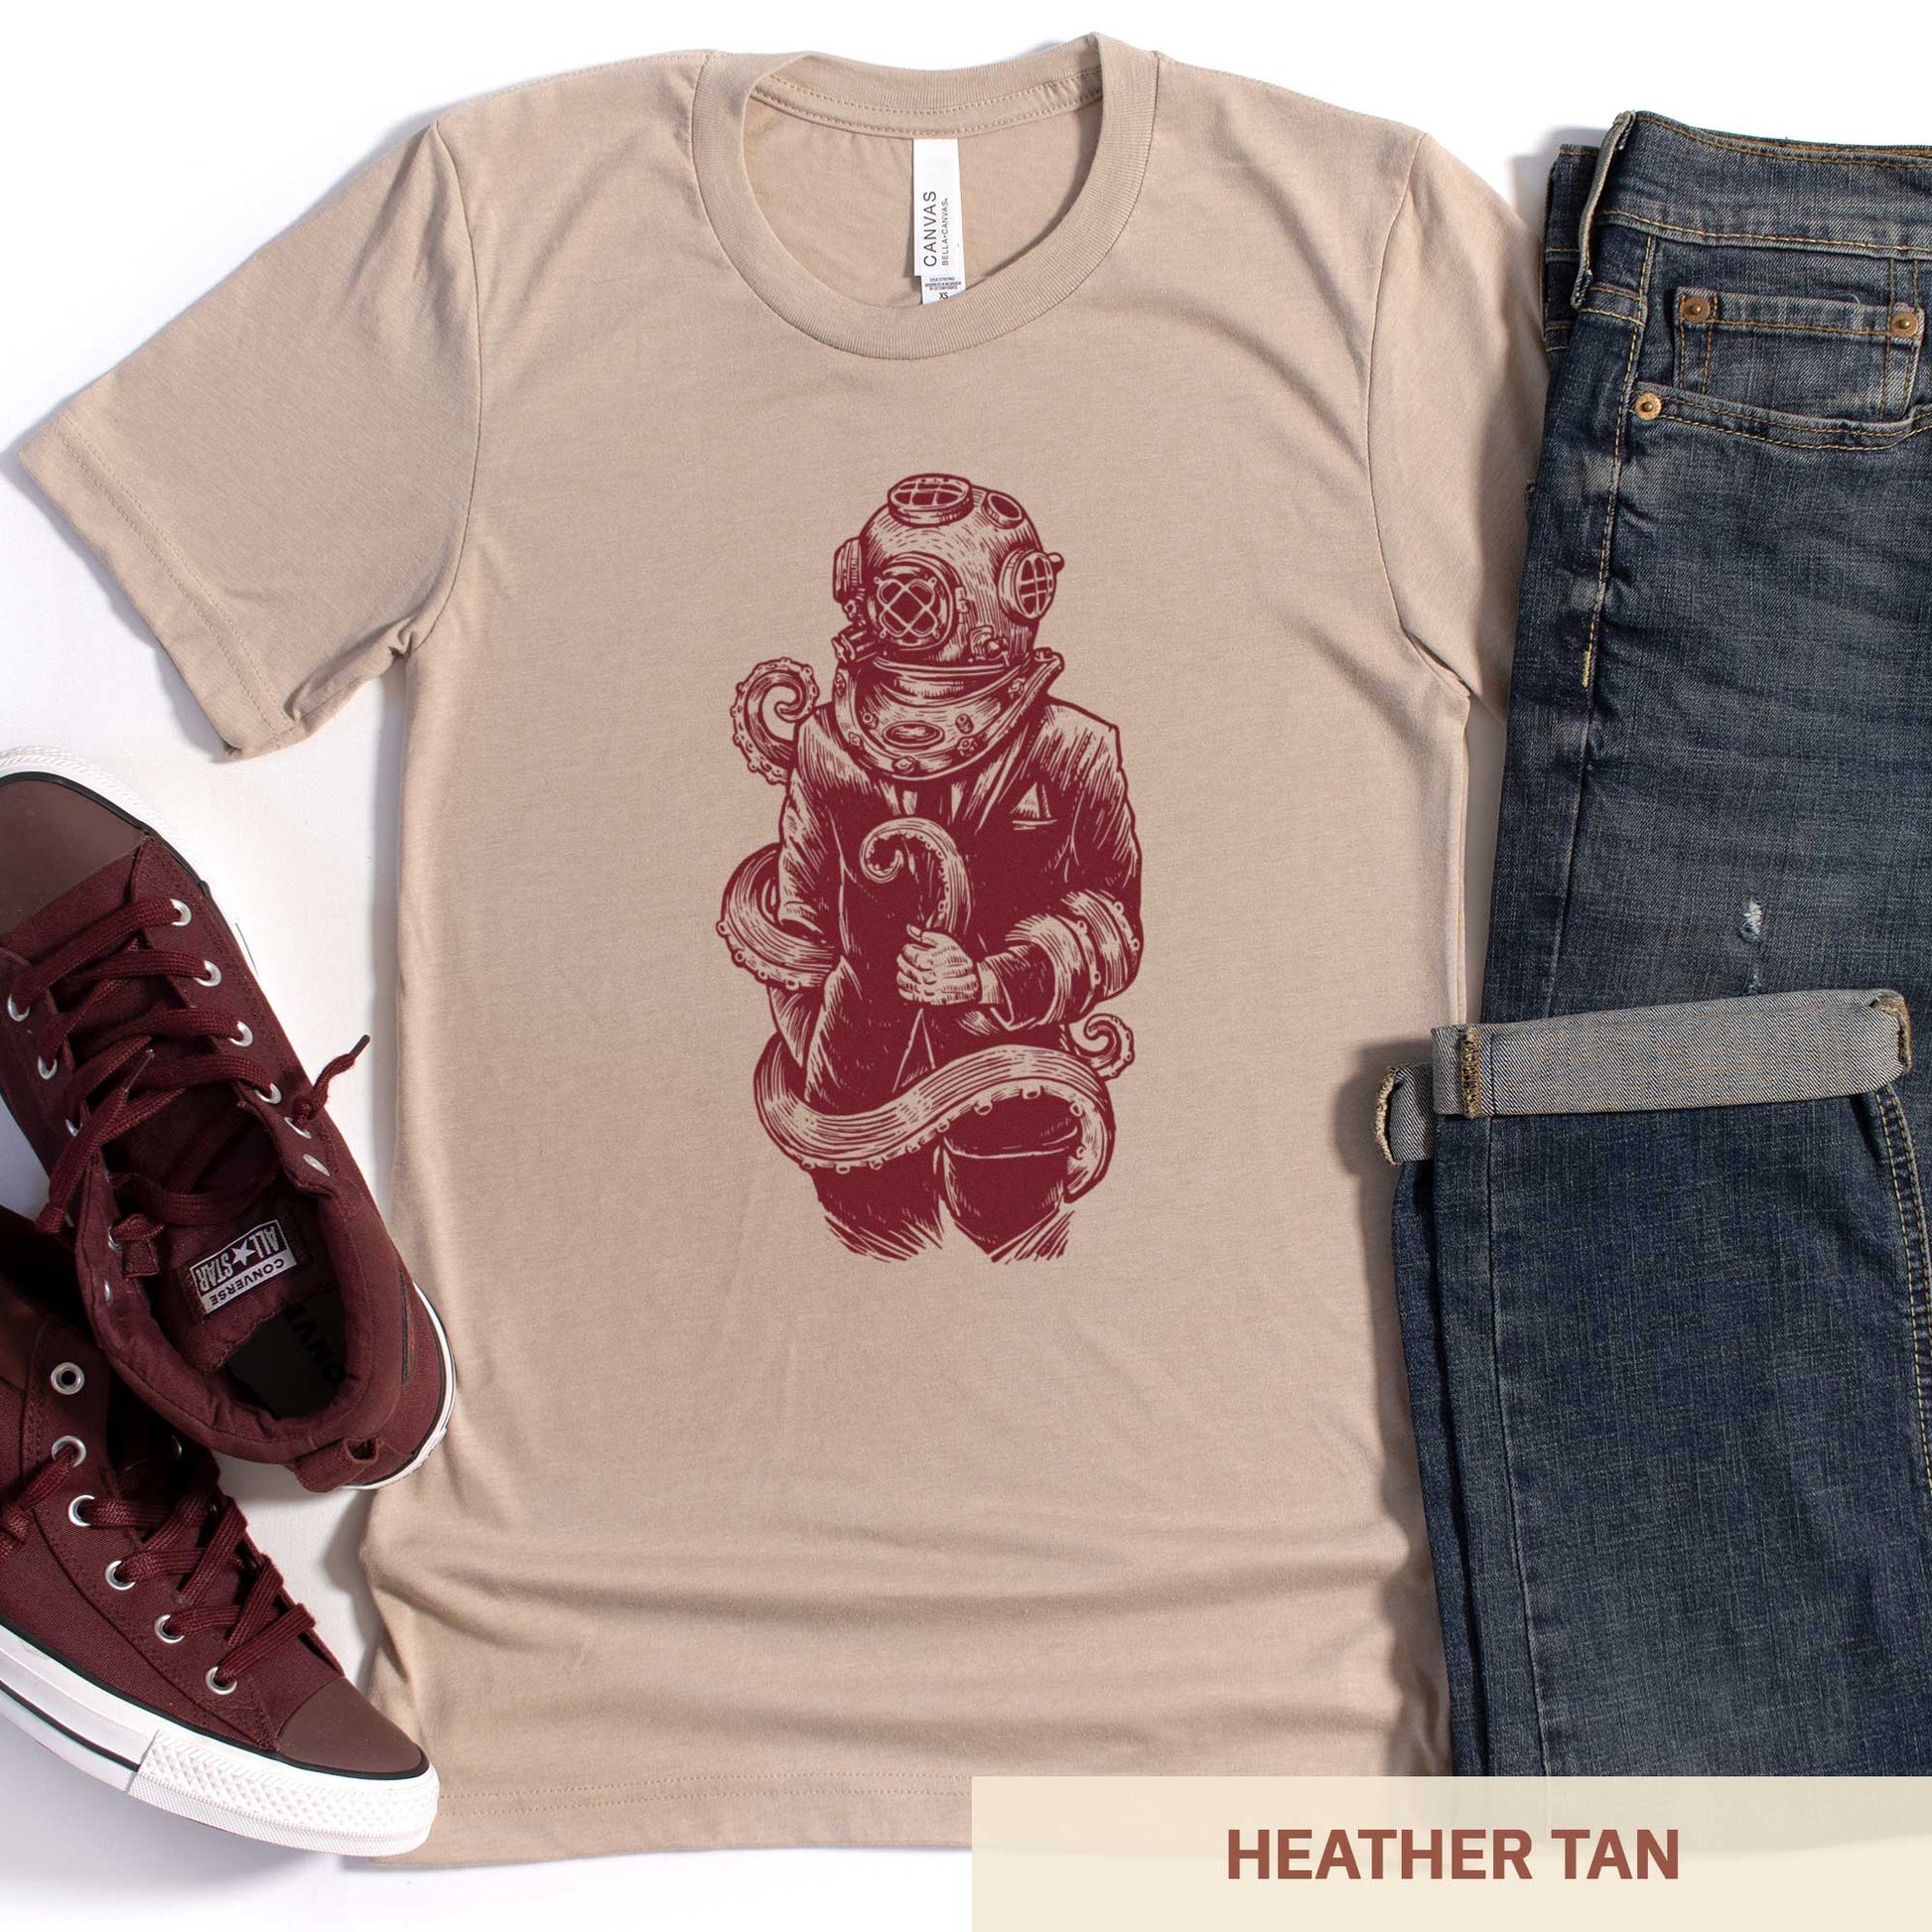 A heather tan Bella Canvas t-shirt featuring a figure in a business suit wearing a vintage diver's helmet with octopus tentacles wrapped around them.